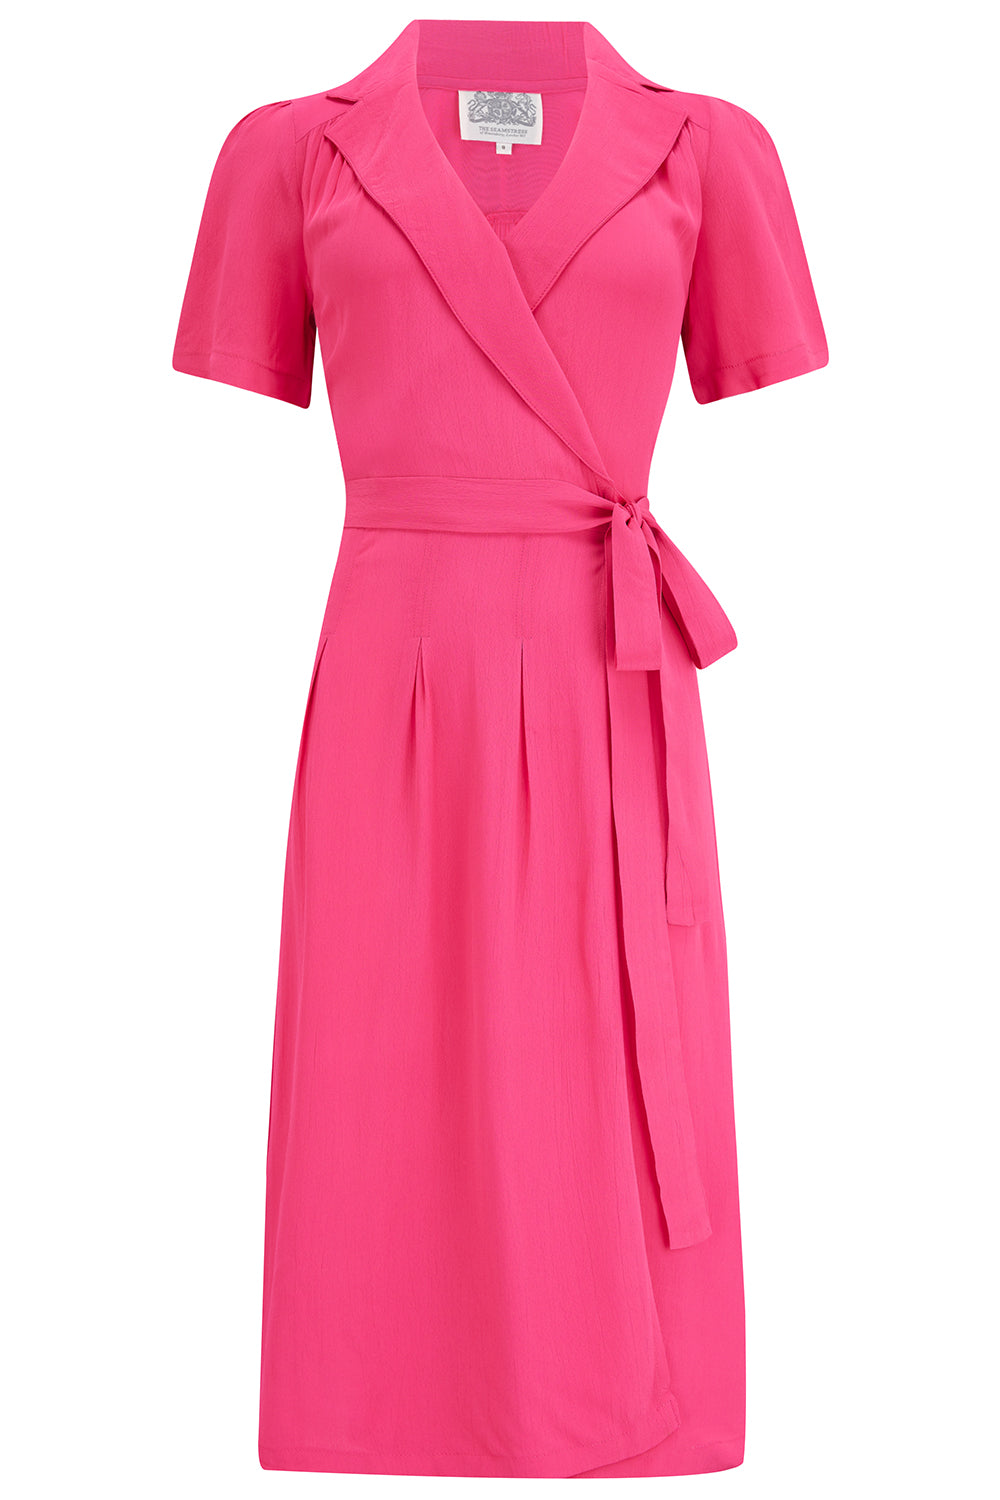 "Peggy" Wrap Dress in Raspberry , Classic 1940s True Vintage Style